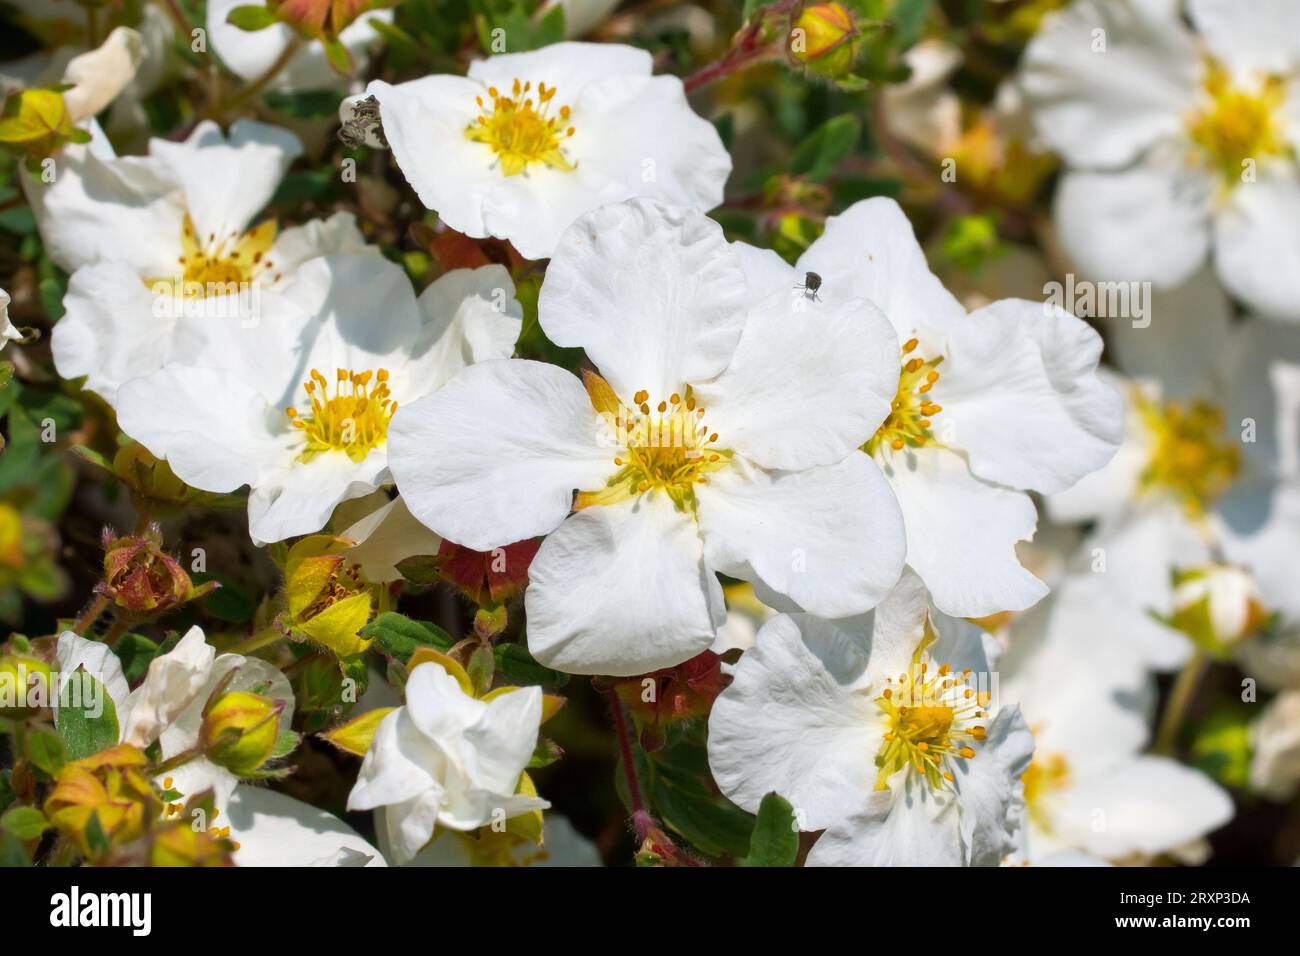 White Cinquefoil (potentilla alba), close up of the white flowers of the shrub commonly planted in gardens and public parks. Stock Photo